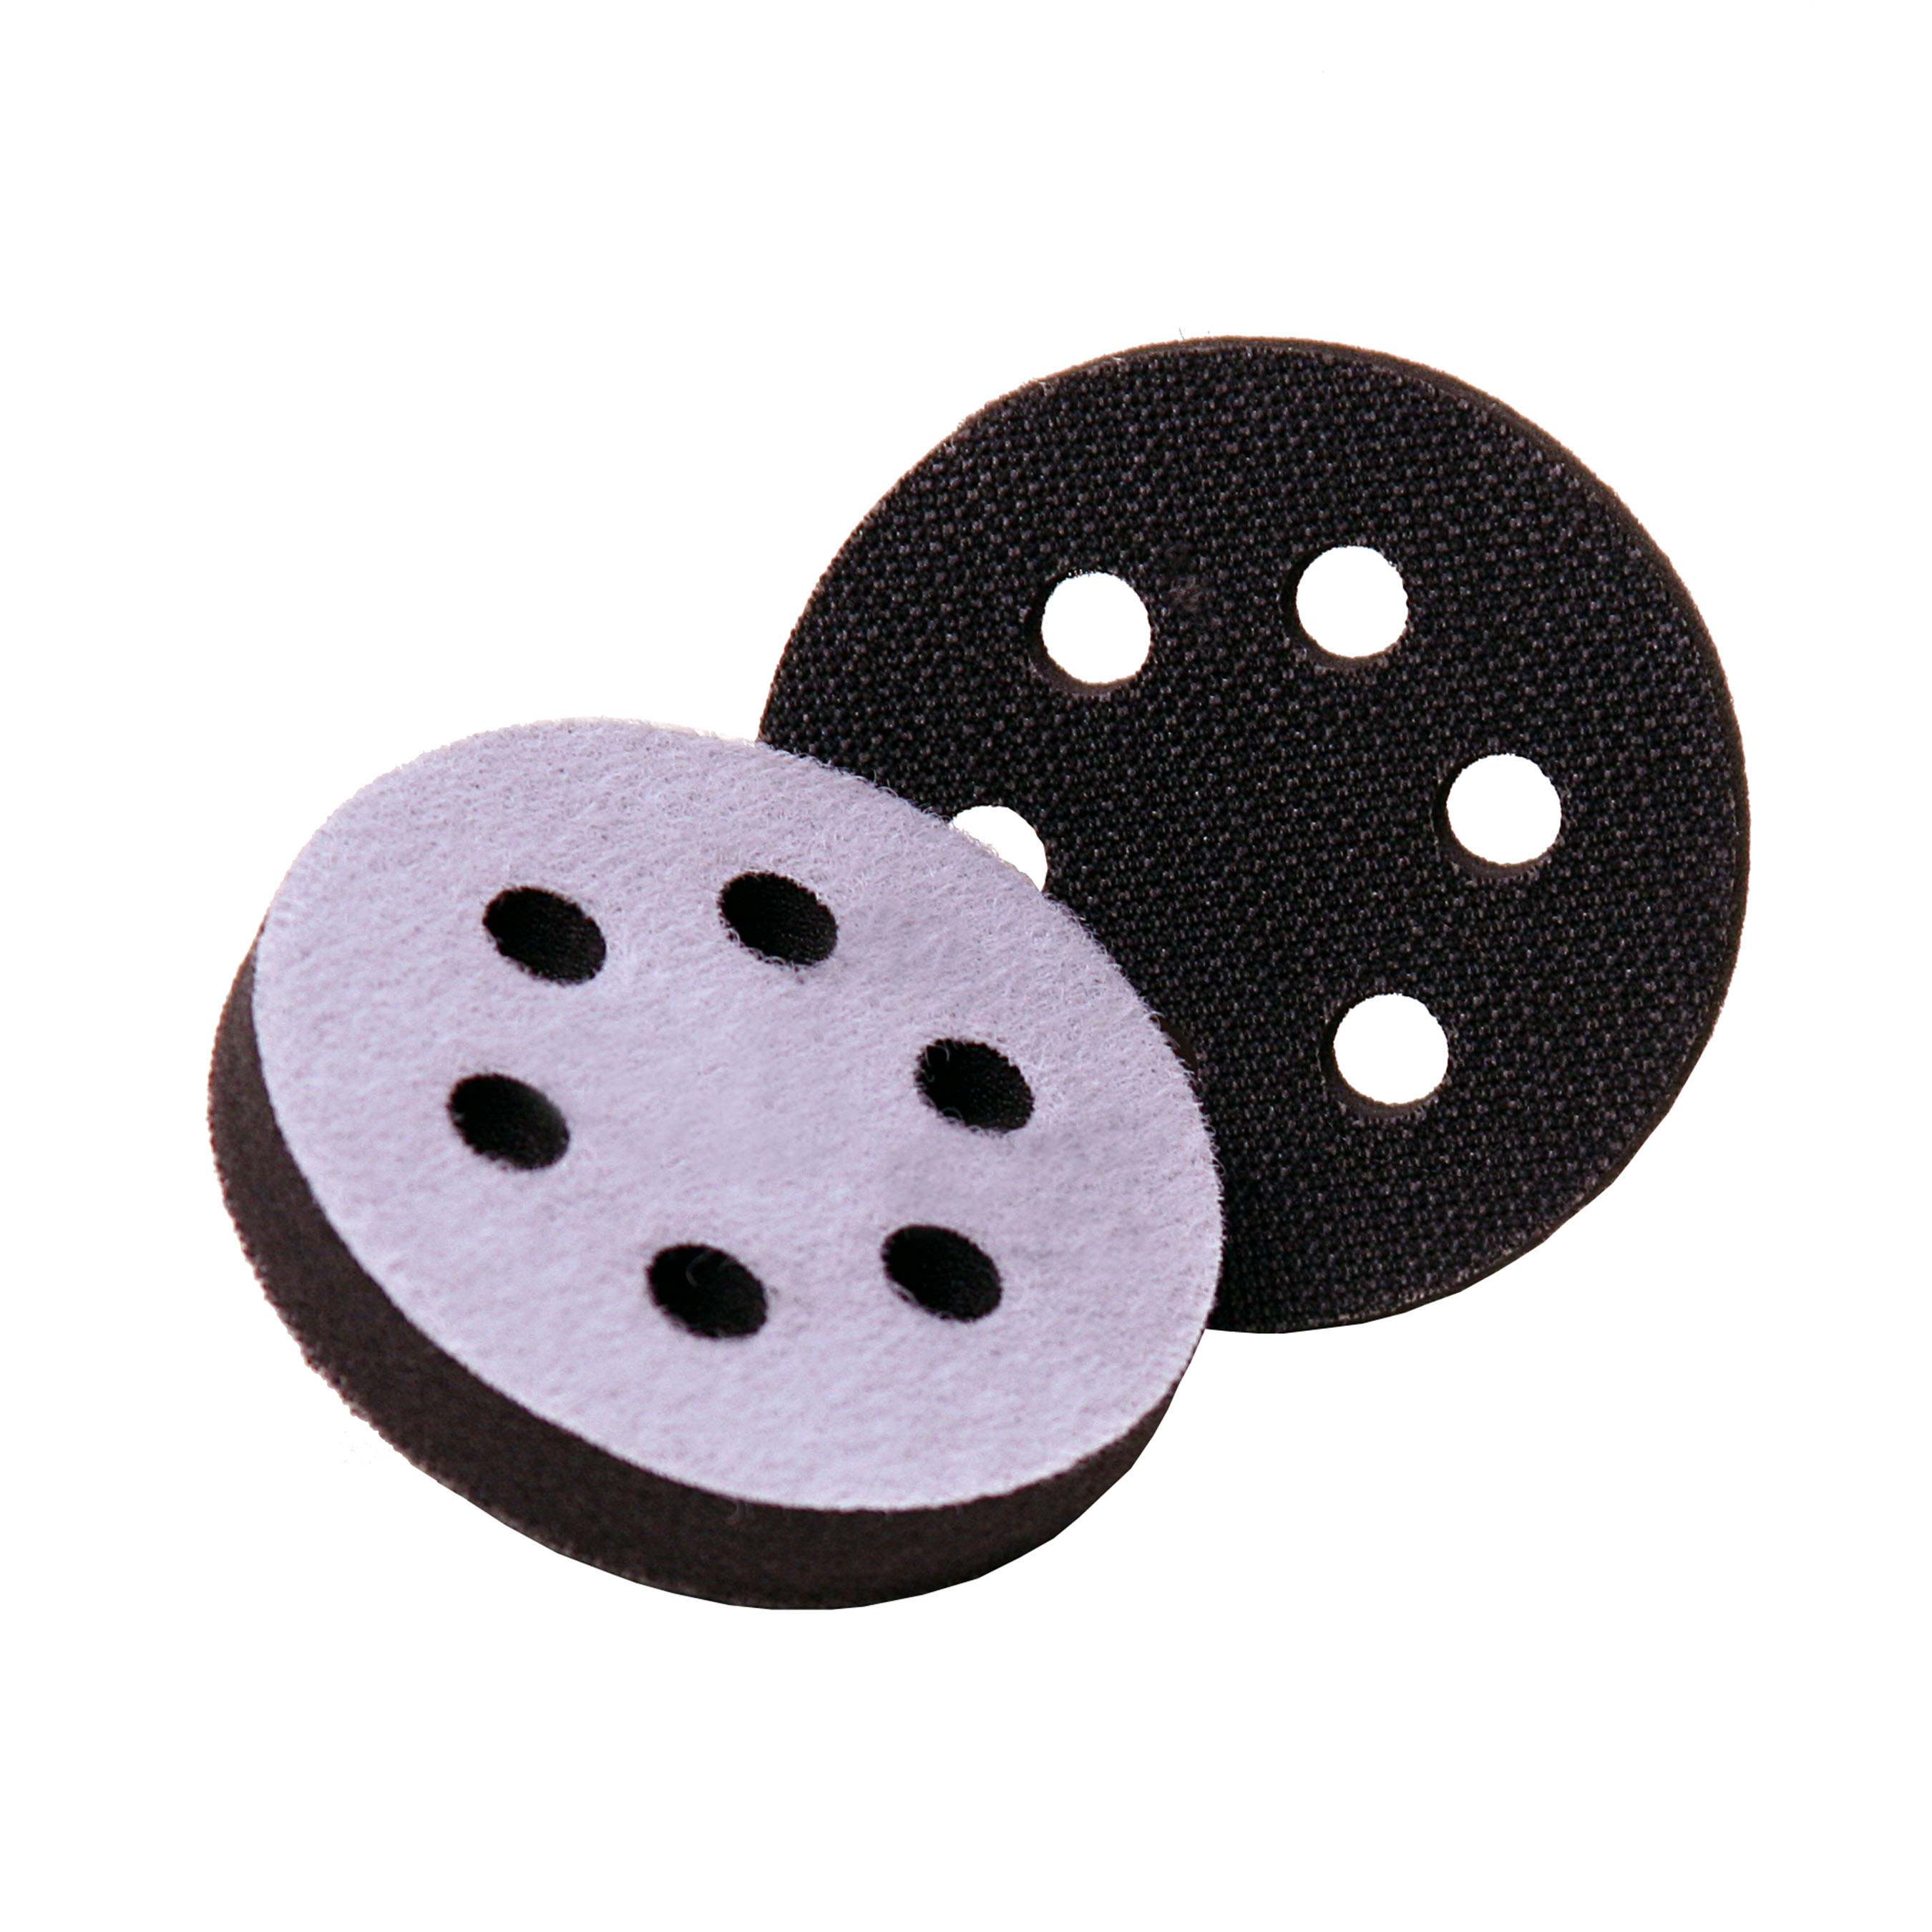 00051131057715 3M™ Hookit™ Soft Interface Pad, 05771, in, 10 per case  Aircraft products tapes 6327813